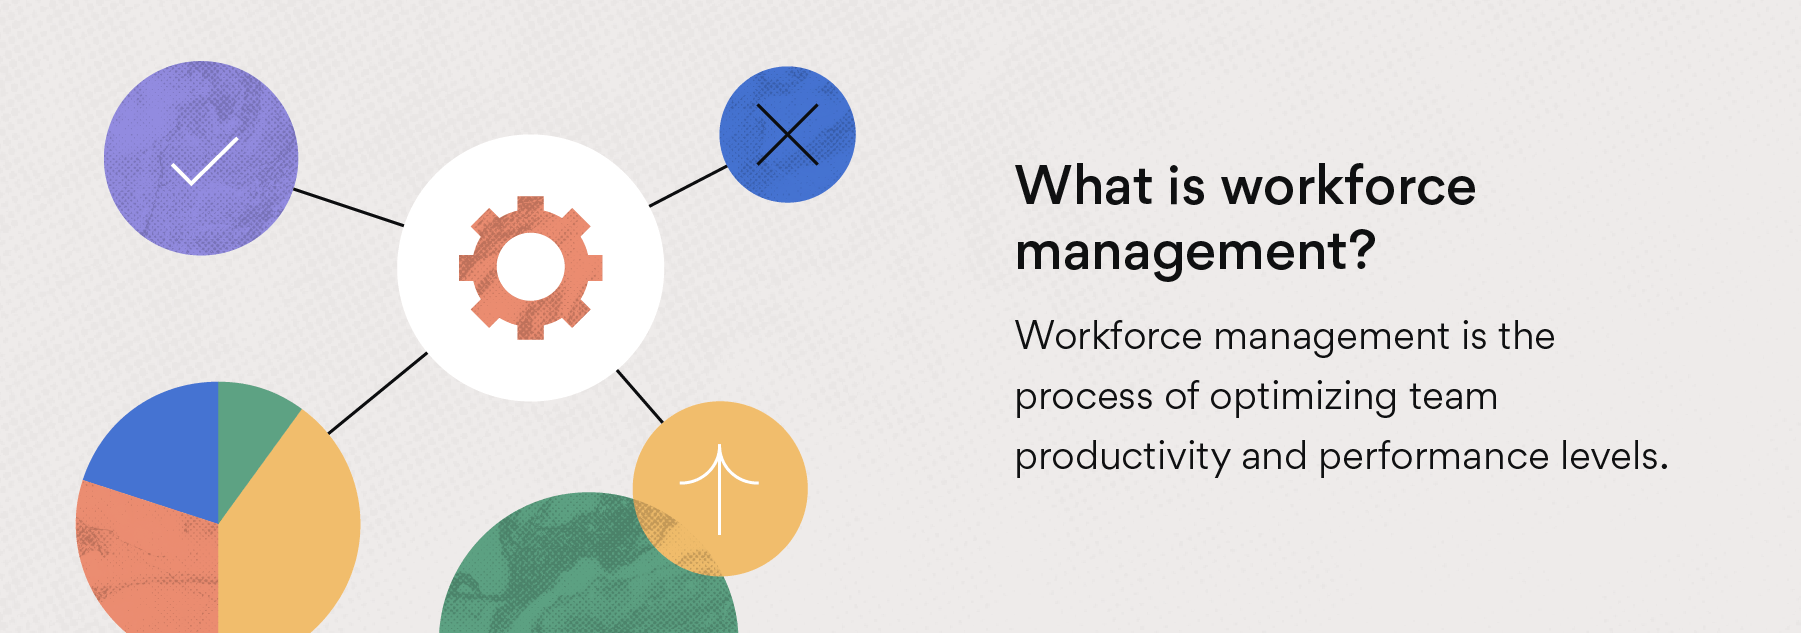 What is workforce management?